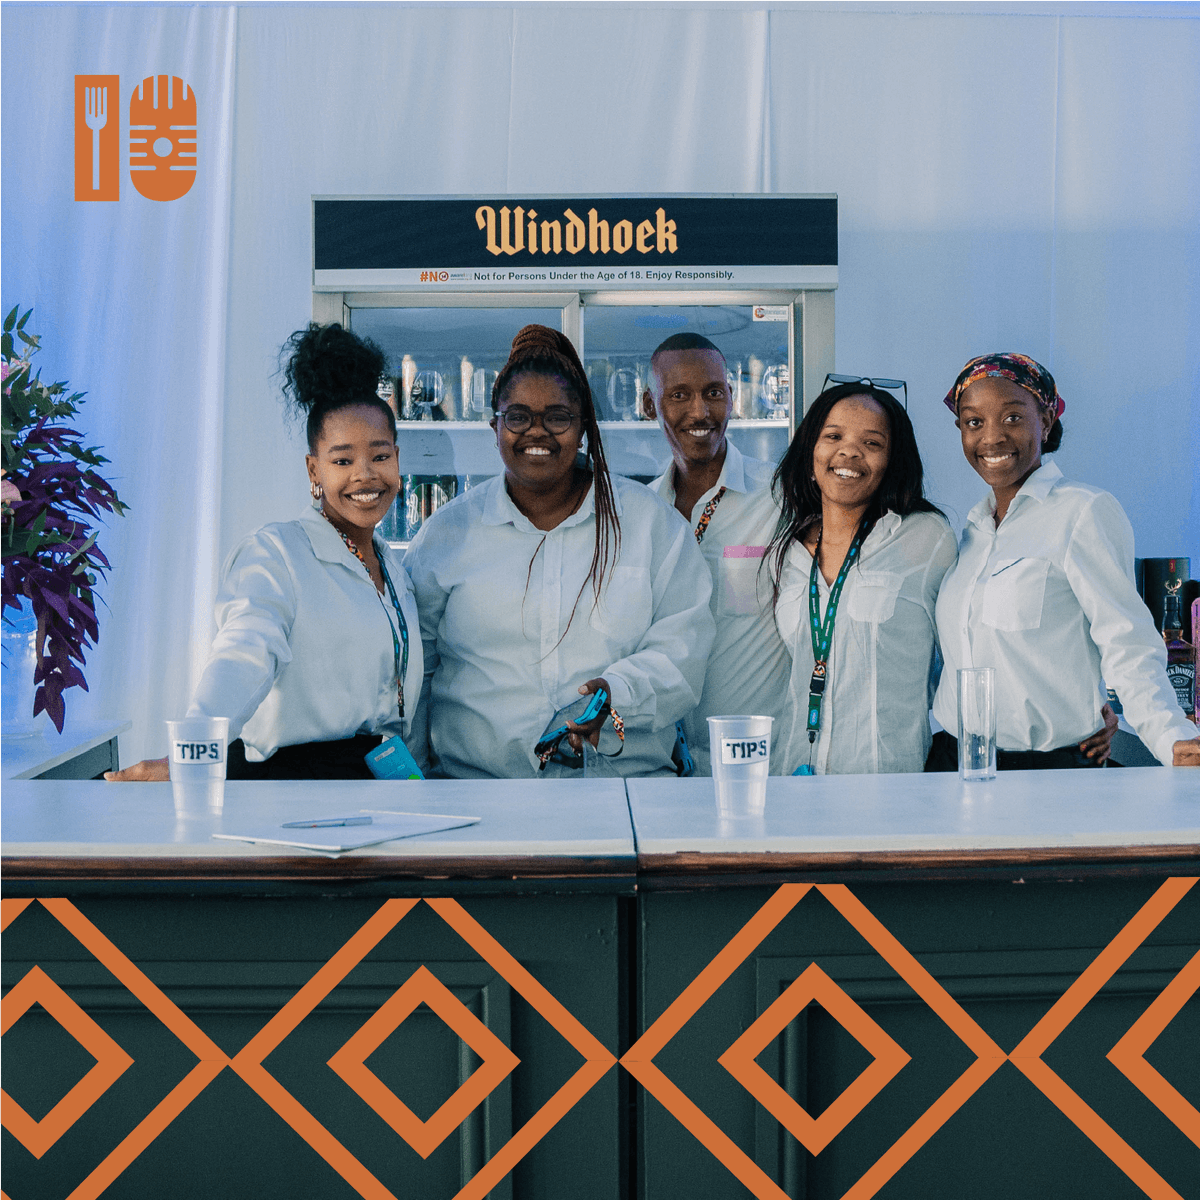 The @WindhoekBeer_SA stand at #DStvDeliciousFestival was the epitome of premium beer bliss. Sipping on crisp brews was a tasteful symphony for the senses – a touch of class had us feeling the energy. #WindhoekbeerSA #100PercentPure #GPLifestyle #VisitGauteng #Welcome2joburg